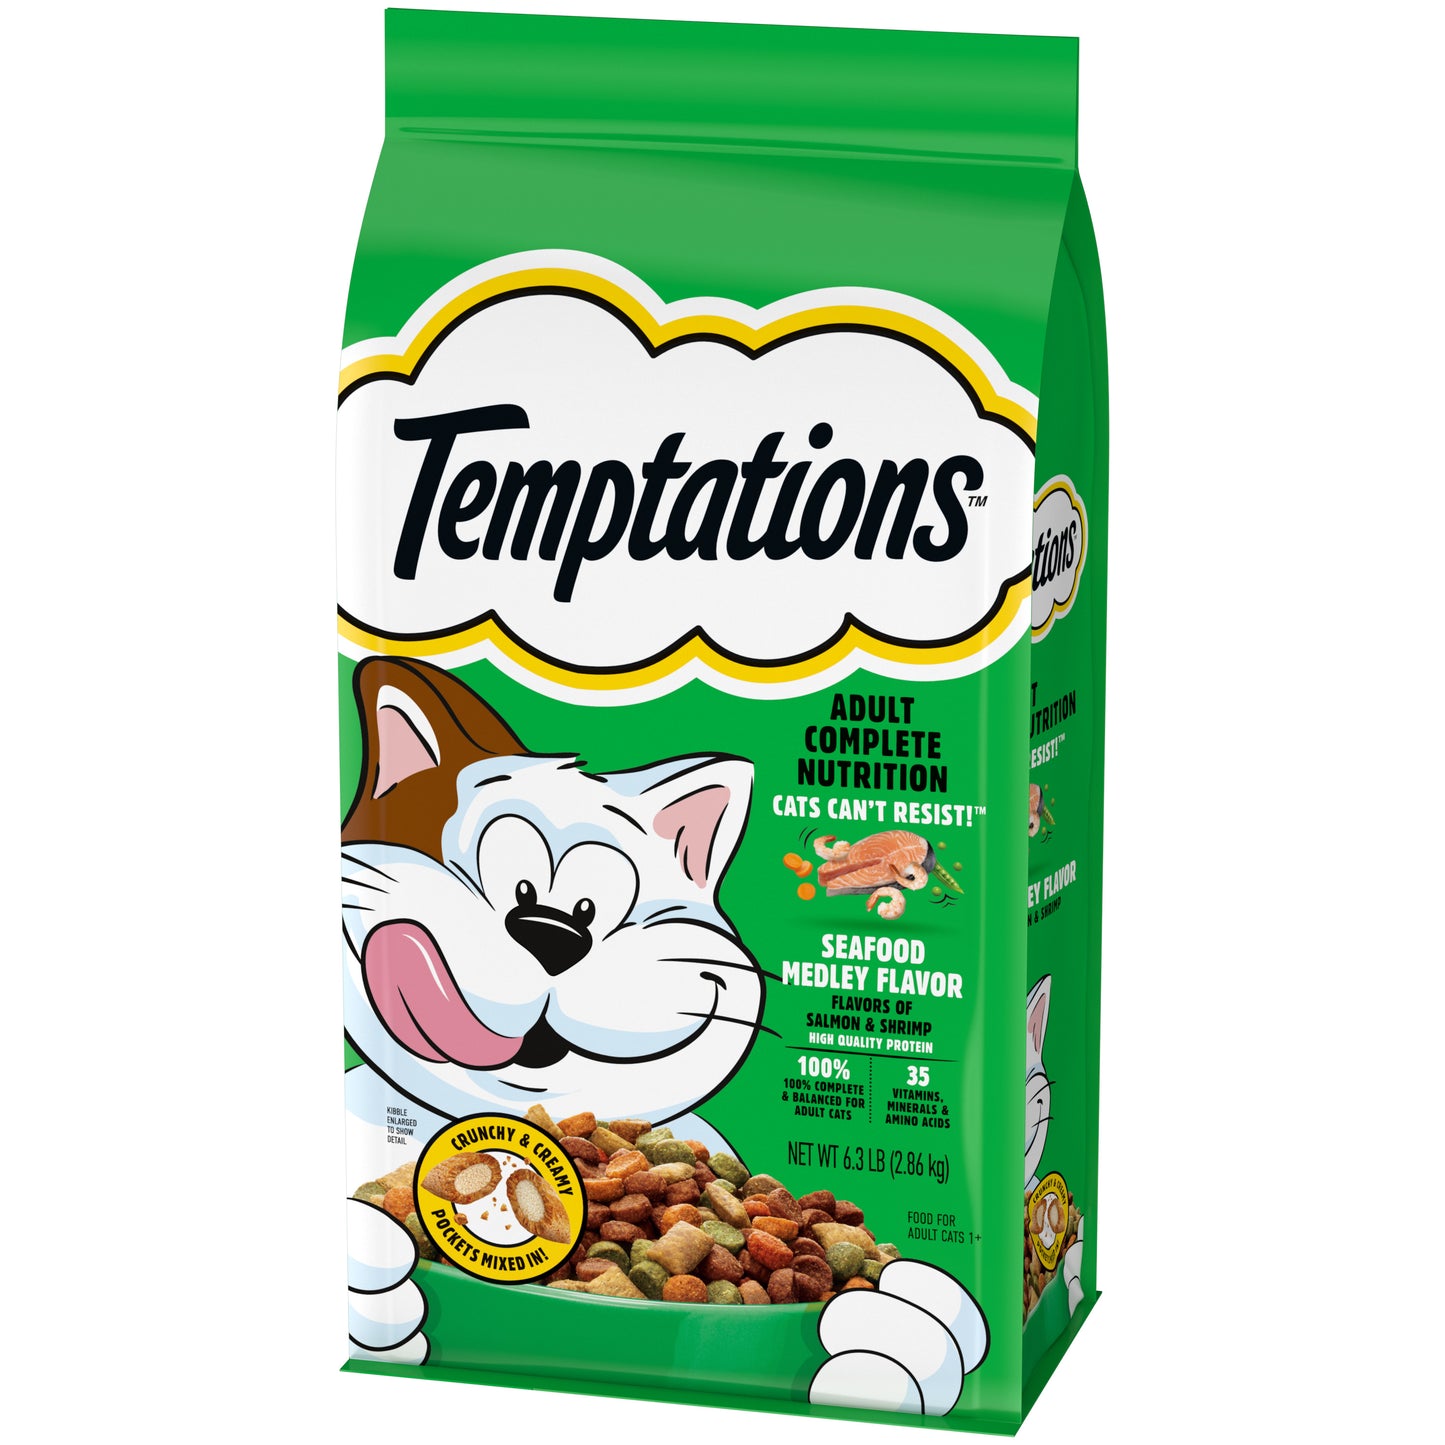 [Temptations][TEMPTATIONS Adult Dry Cat Food, Seafood Medley Flavor, 6.3 lb. Bag][Image Center Right (3/4 Angle)]